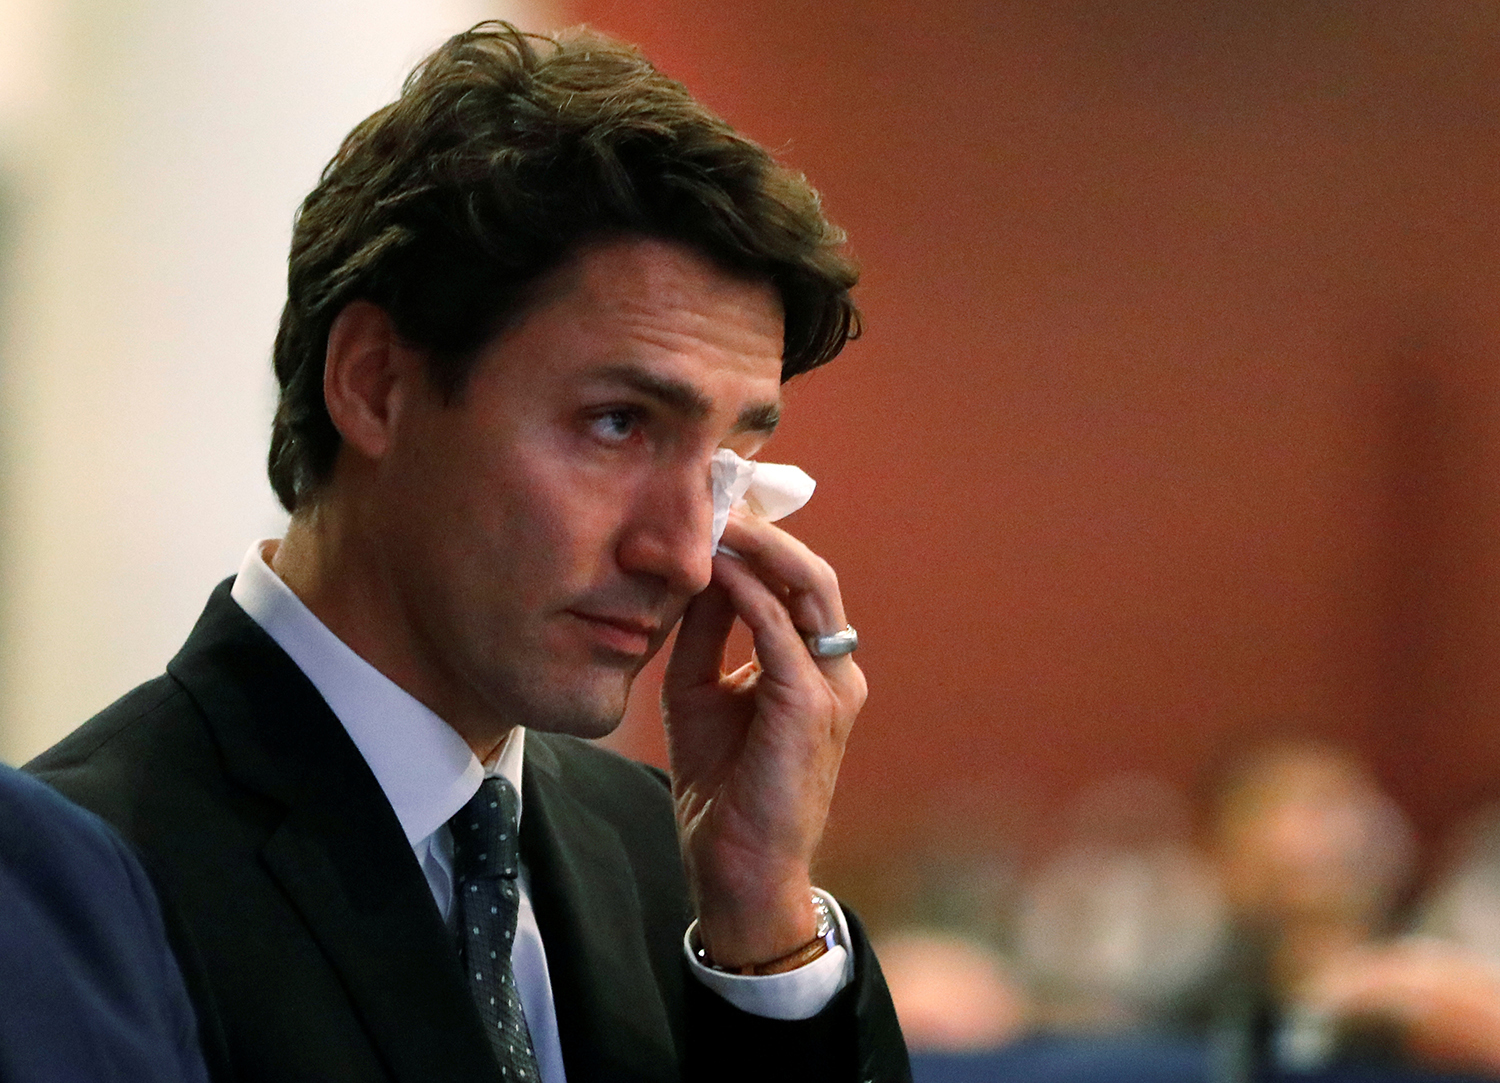 QUEBEC CITY 2017-02-03 REFILE - CORRECTING SPELLING IN BYLINECanada's Prime Minister Justin Trudeau wipes a tear during funeral services for three of the victims of the deadly shooting at the Quebec Islamic Cultural Centre, at the Congress Centre in Quebec City, Quebec, February 3, 2017.  REUTERS/Mathieu Belanger   TPX IMAGES OF THE DAY Photo:  / REUTERS / TT / kod 72000